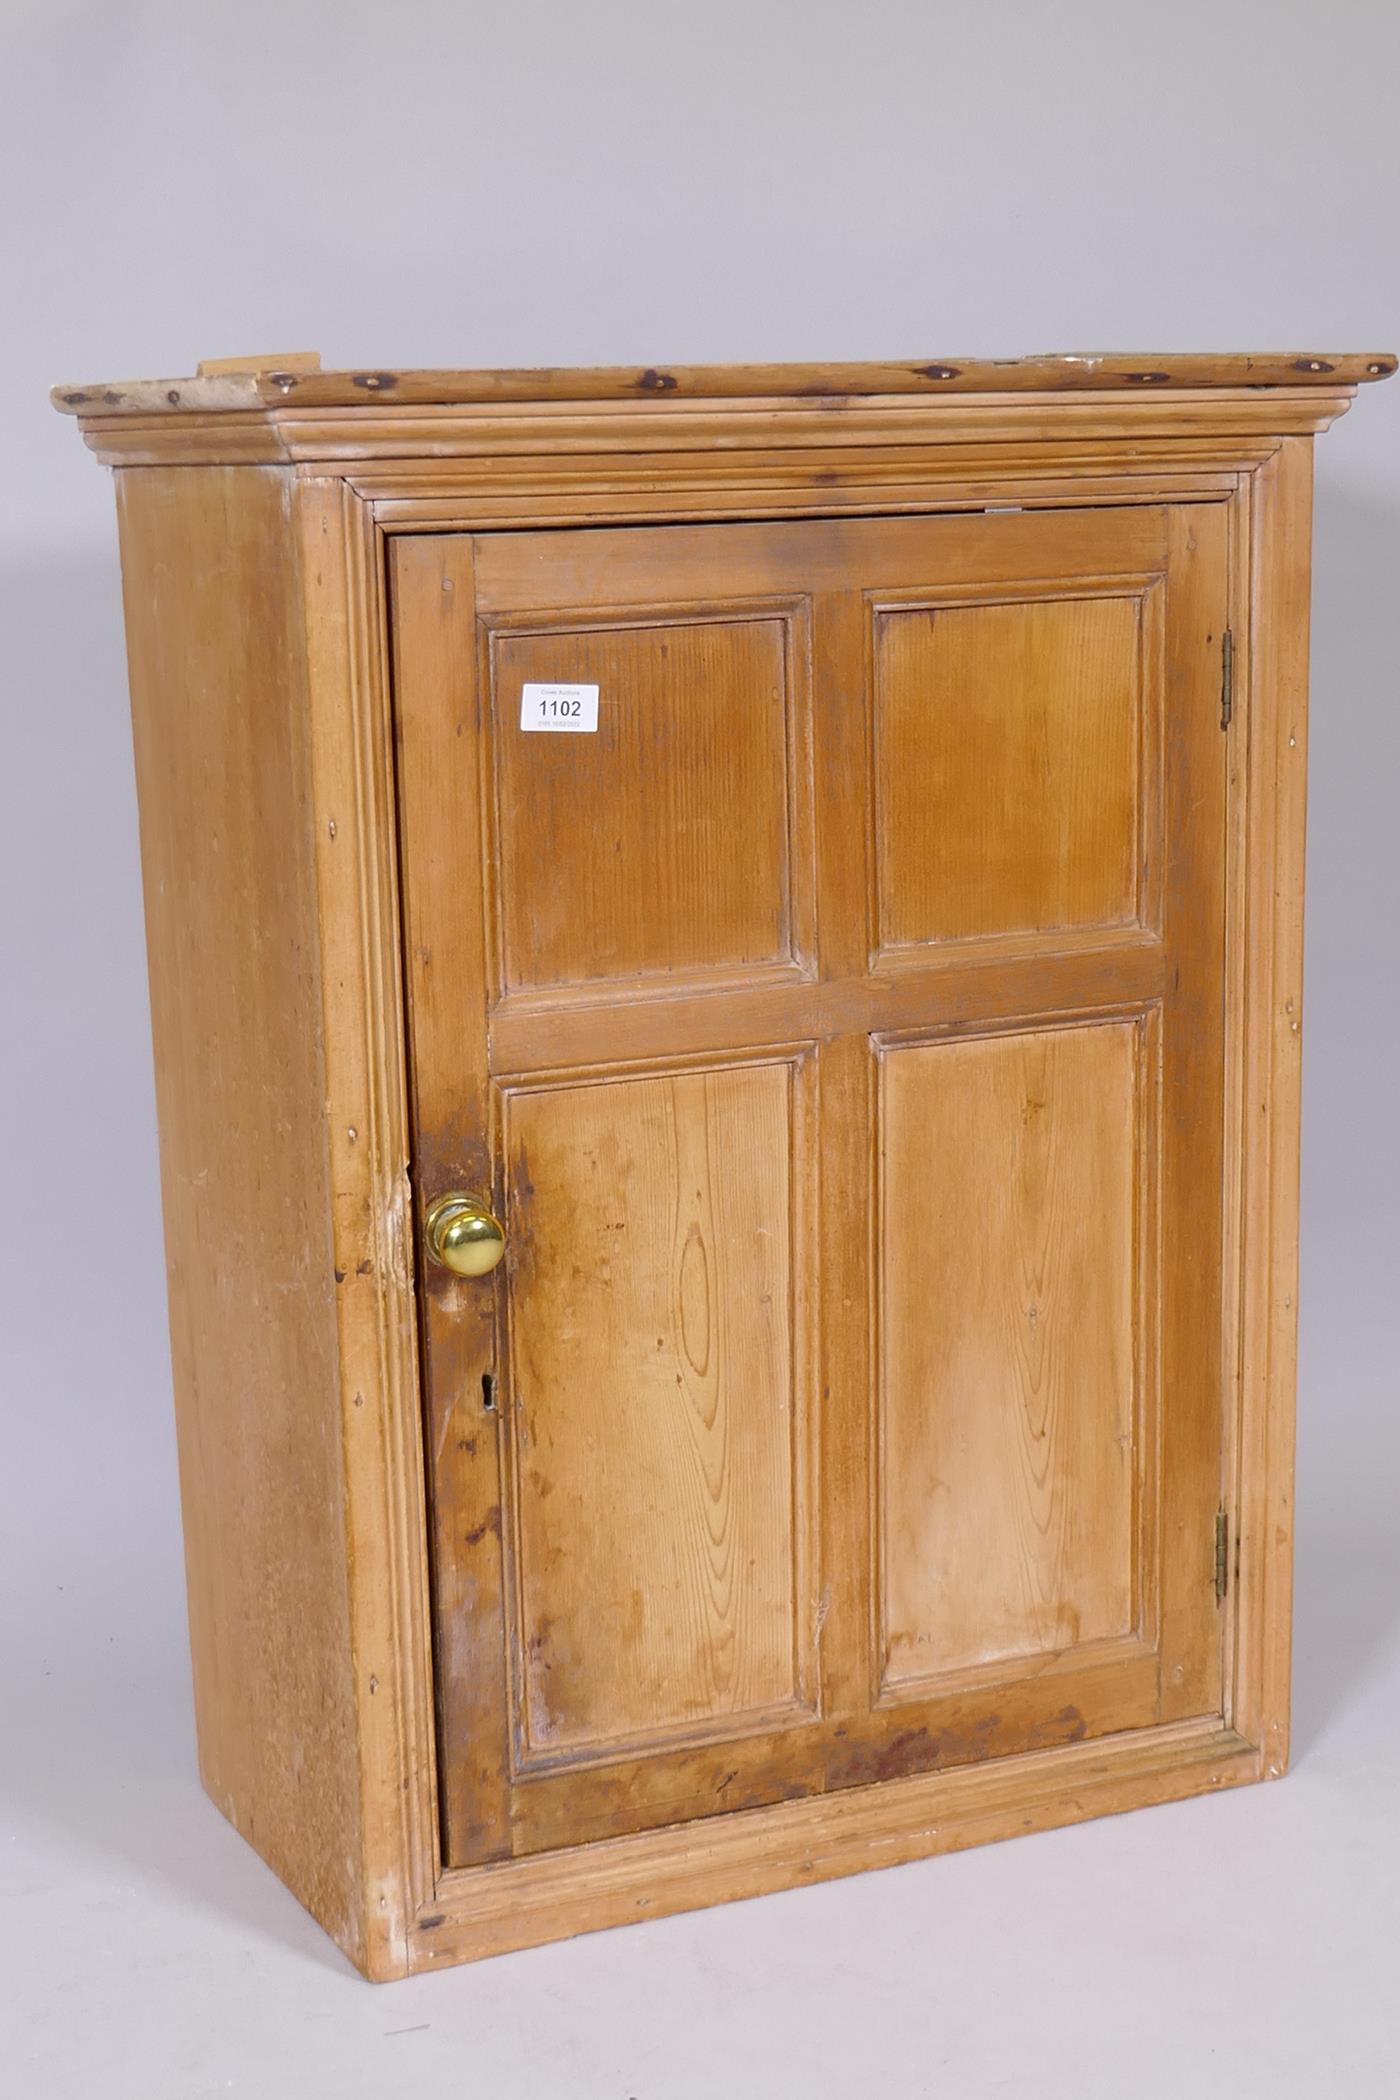 A C19th pine hanging food cupboard with panelled door and two shelves, 24" x 12" x 30" - Image 2 of 3